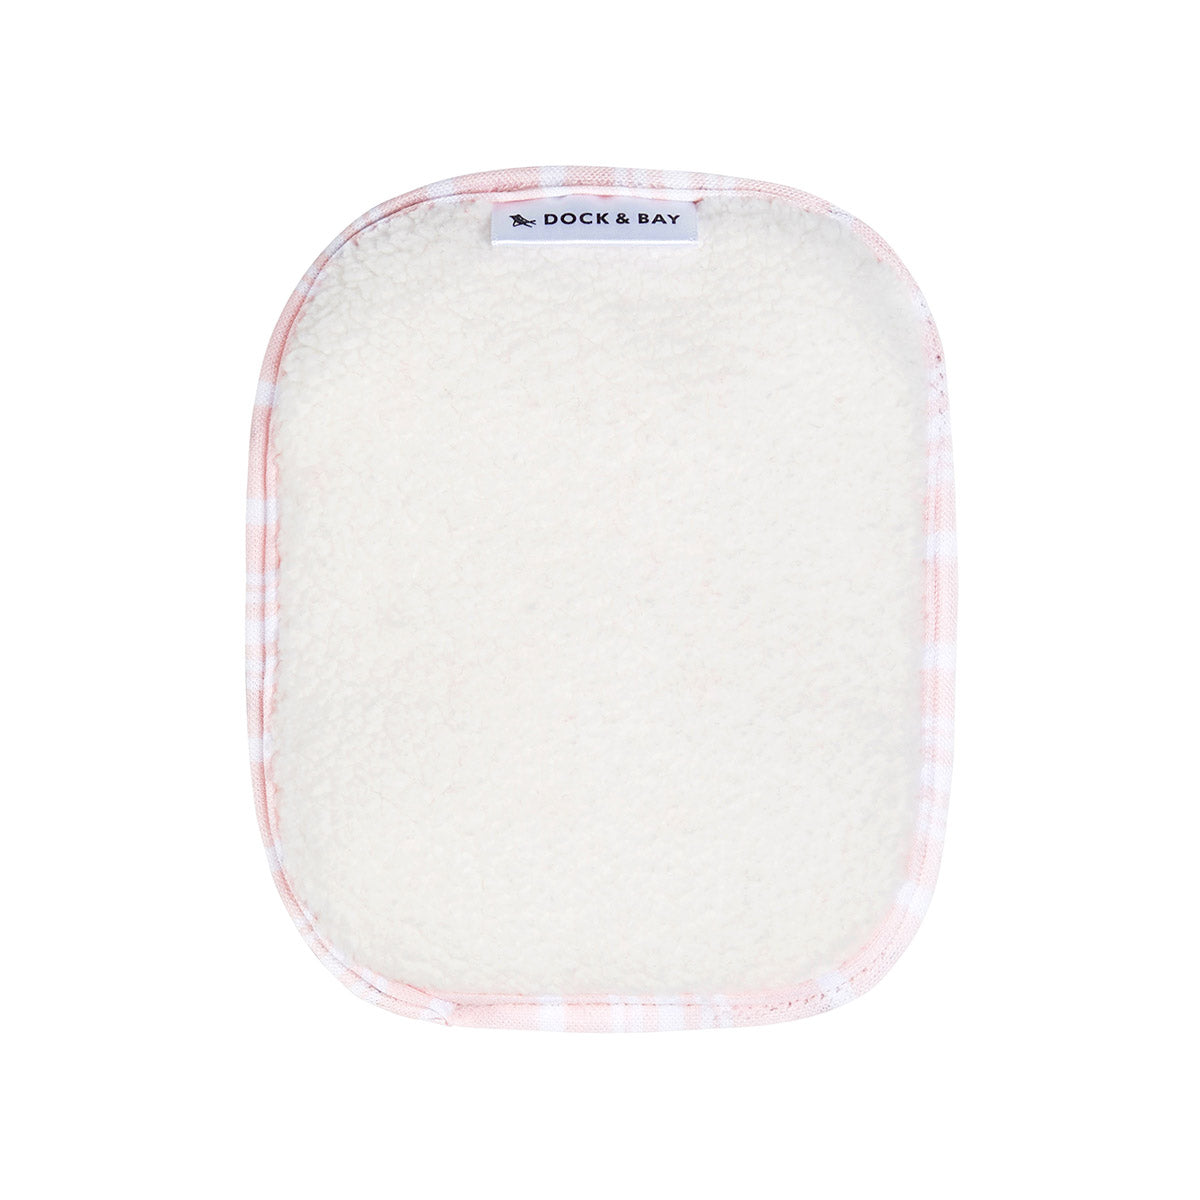 Home Reusable Makeup Wipes (pk of 3) Peppermint Pink